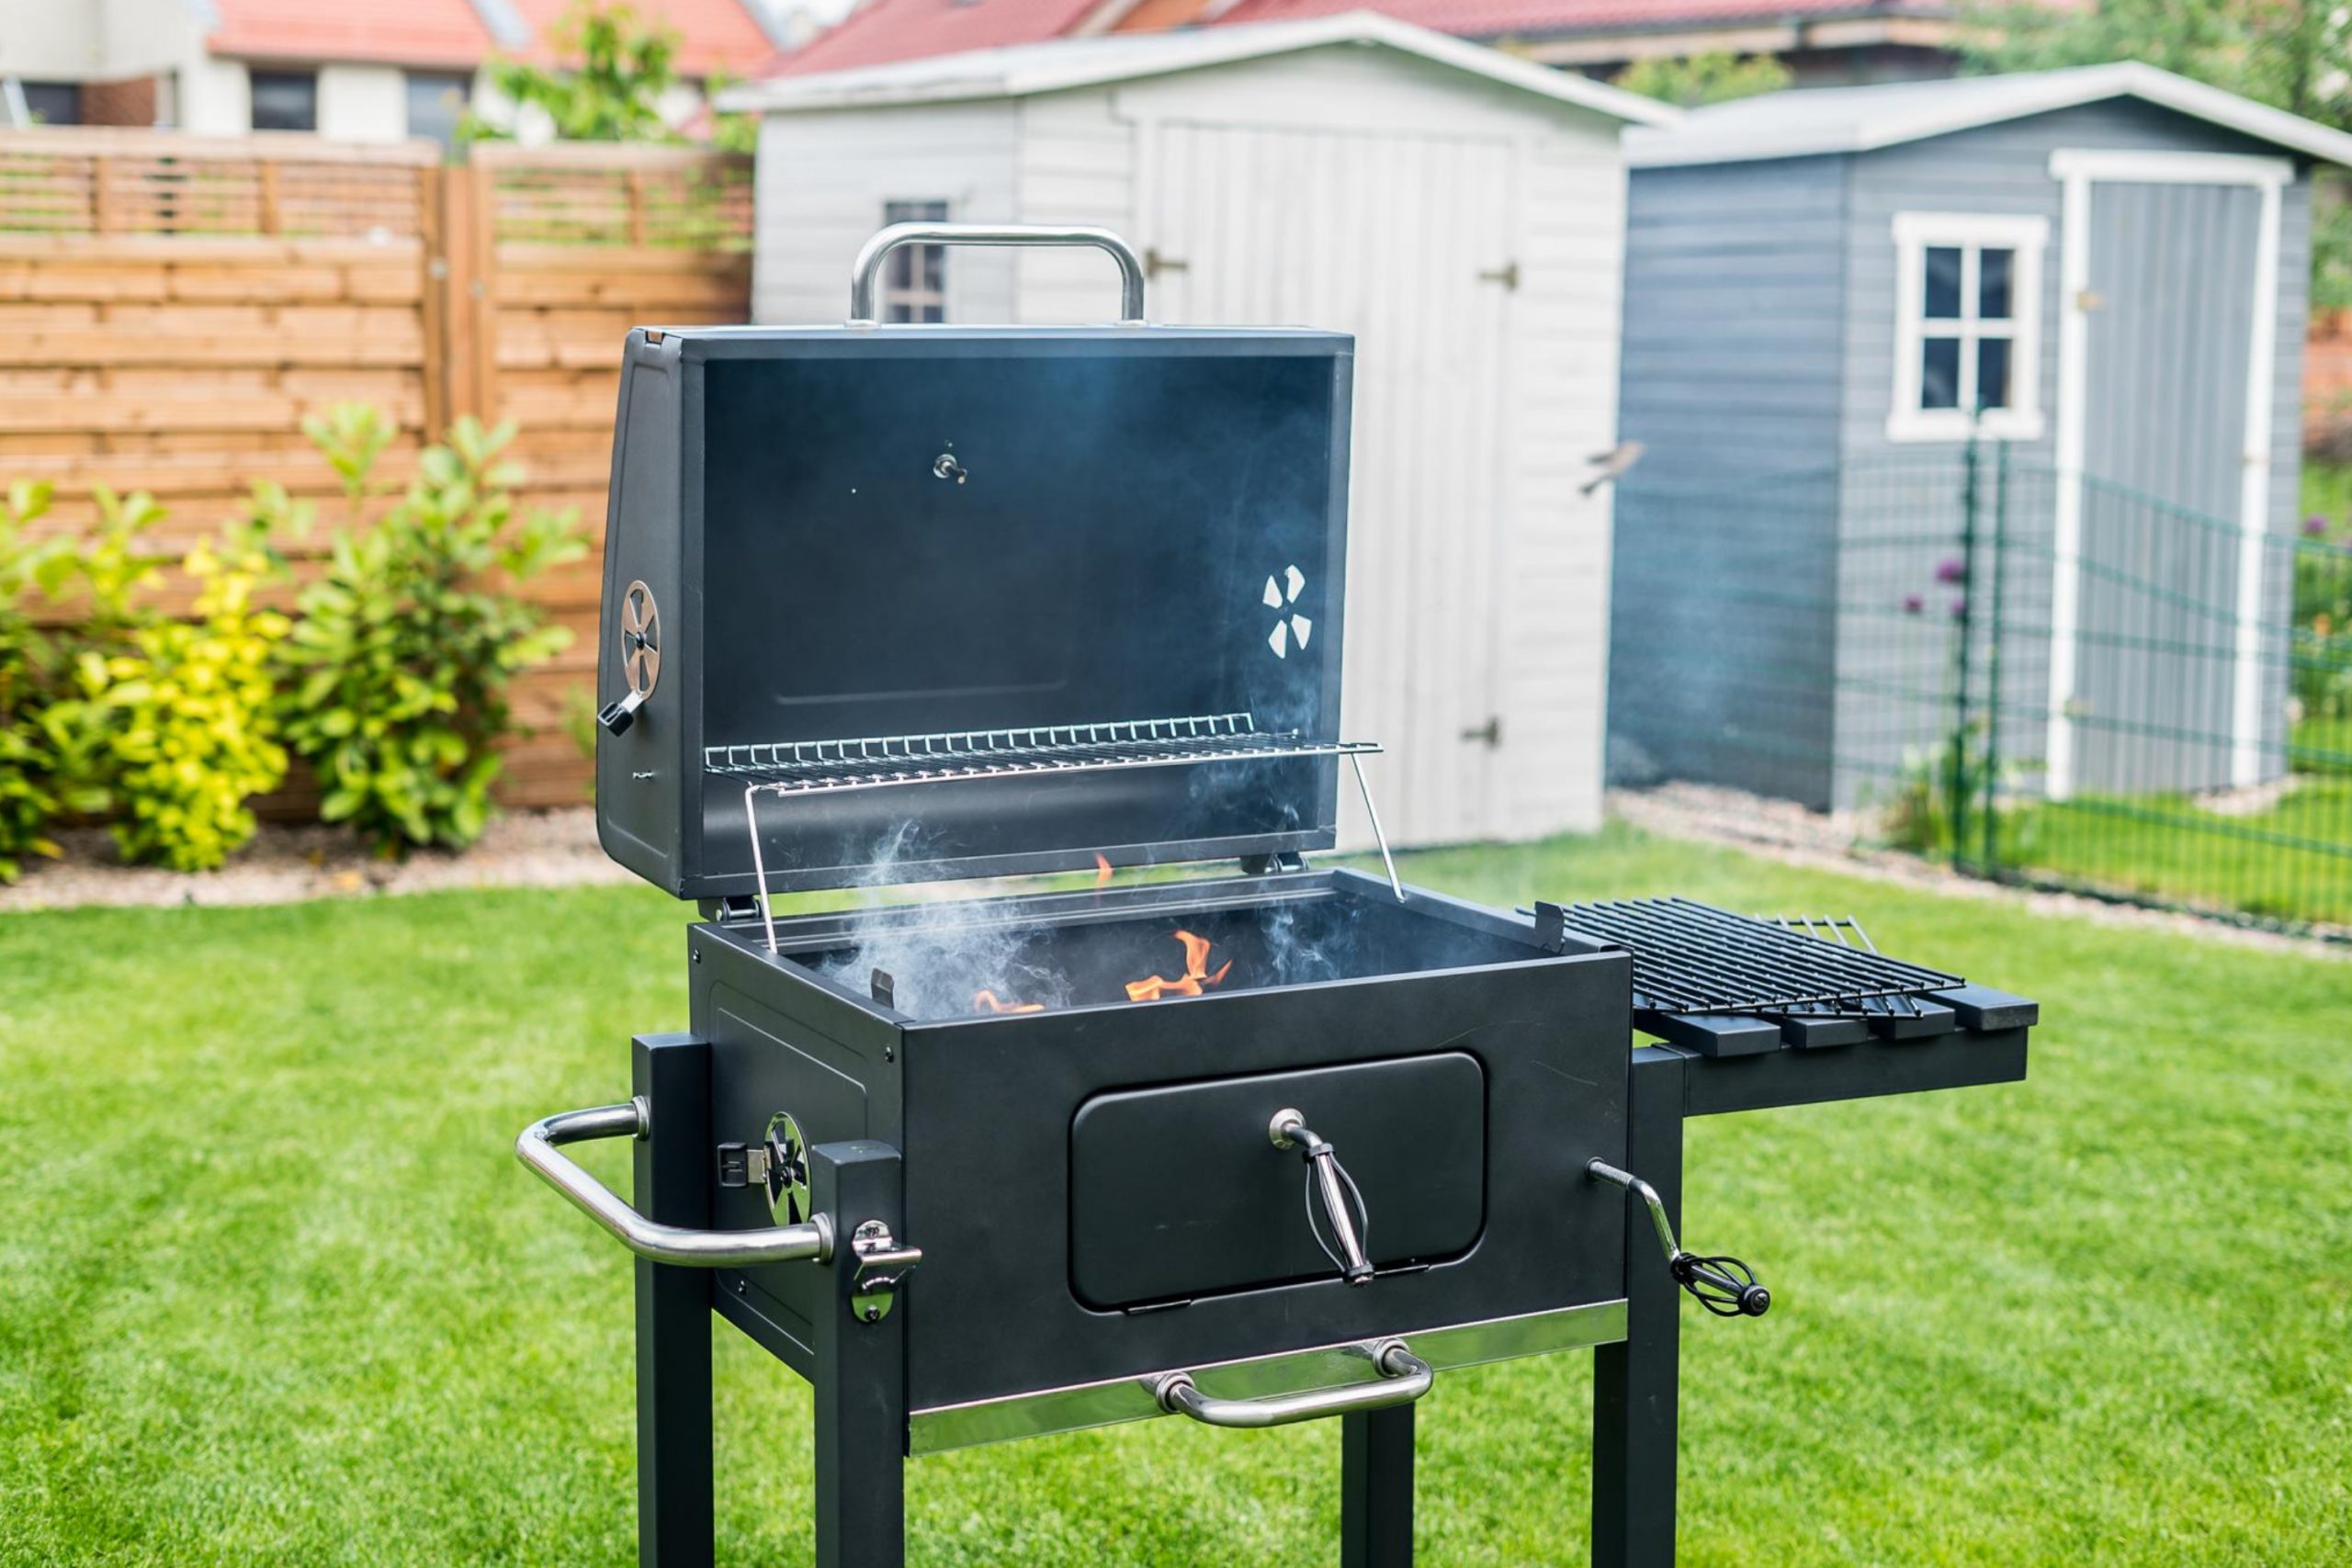 What Is a Heat Shield For a Grill And Why Would You Need It